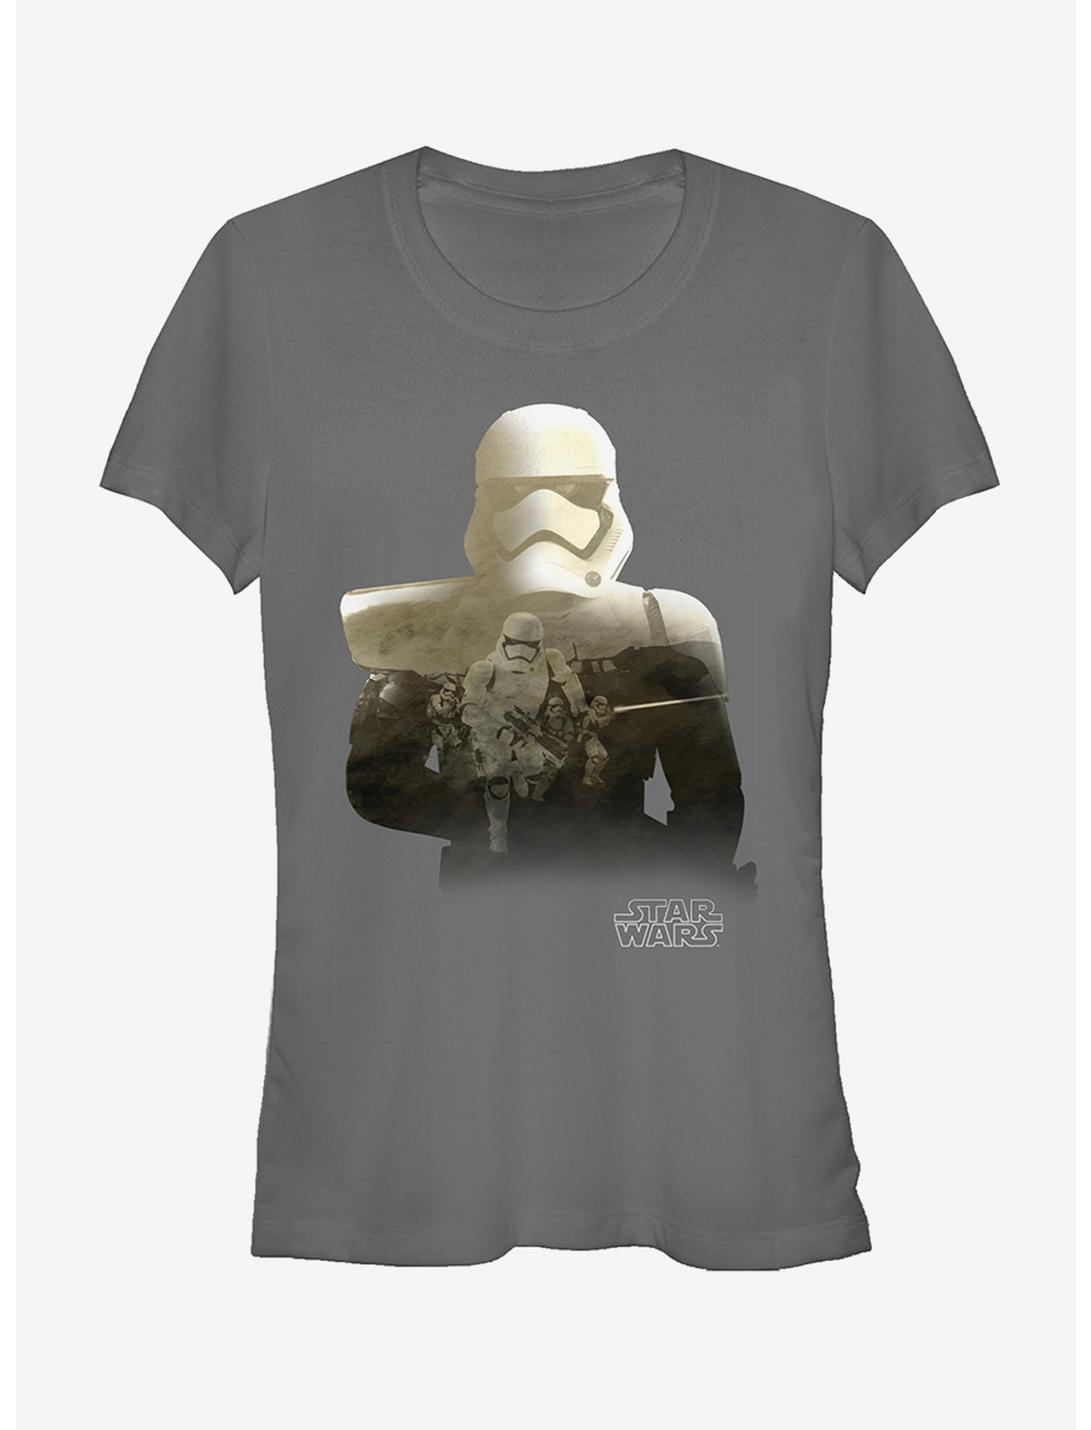 Star Wars Stormtroopers Attack Girls T-Shirt, CHARCOAL, hi-res